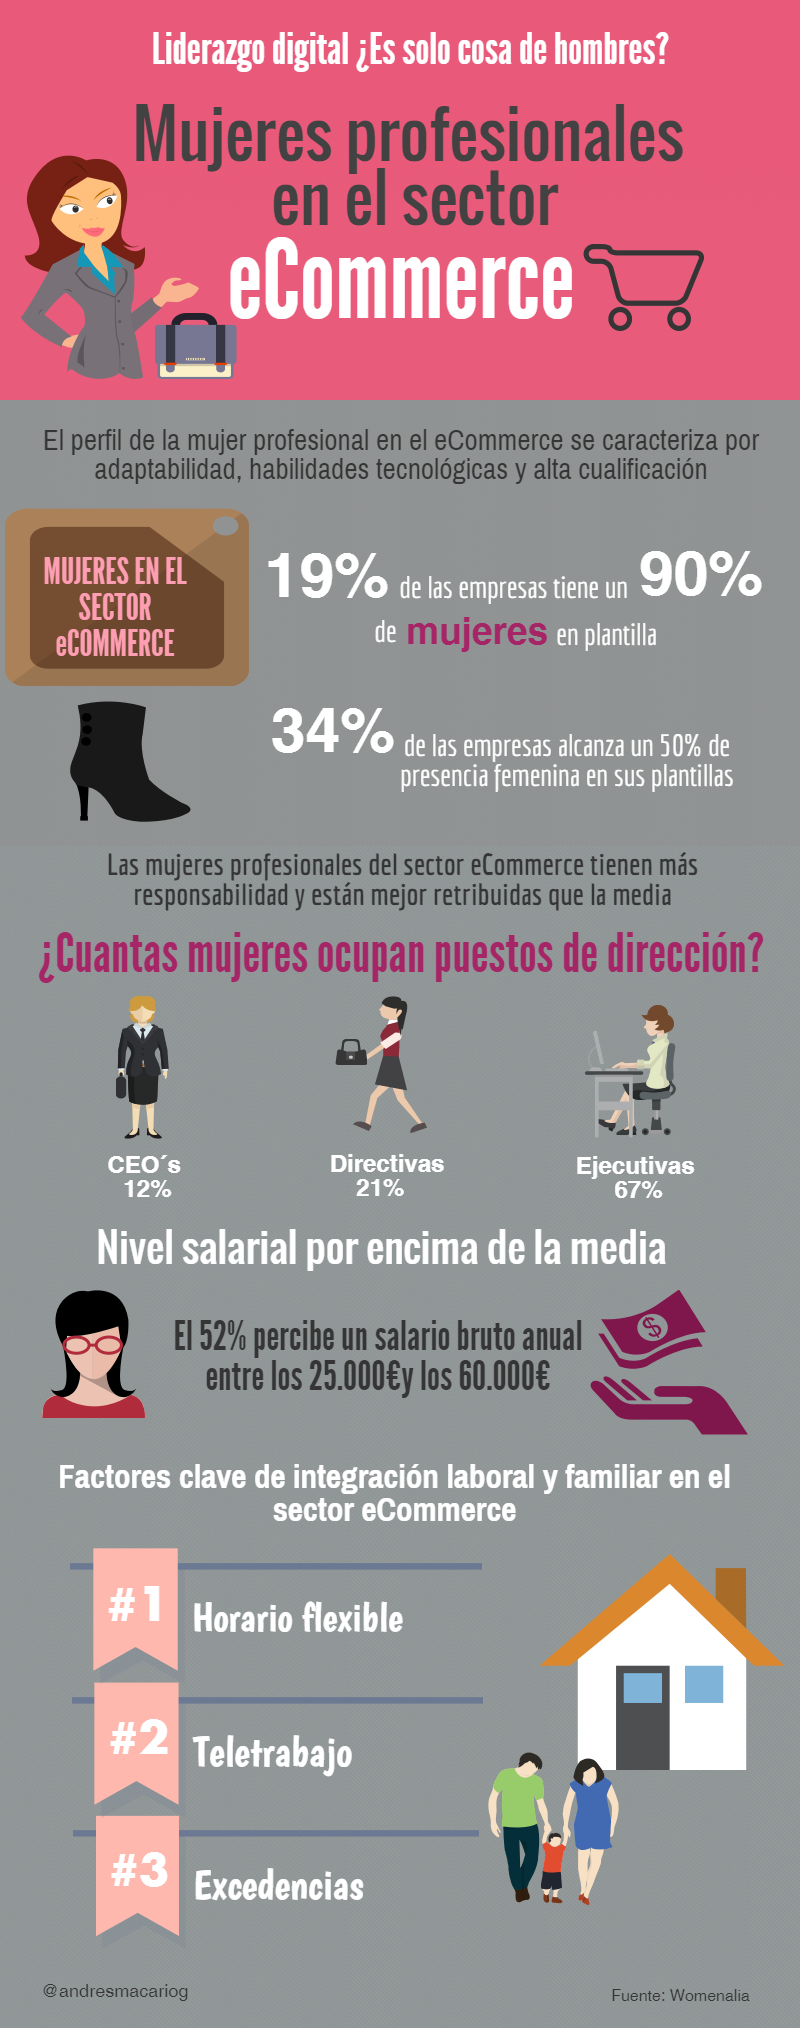 Mujeres-Sector-eCommerce-Infografia-Andres-Macario